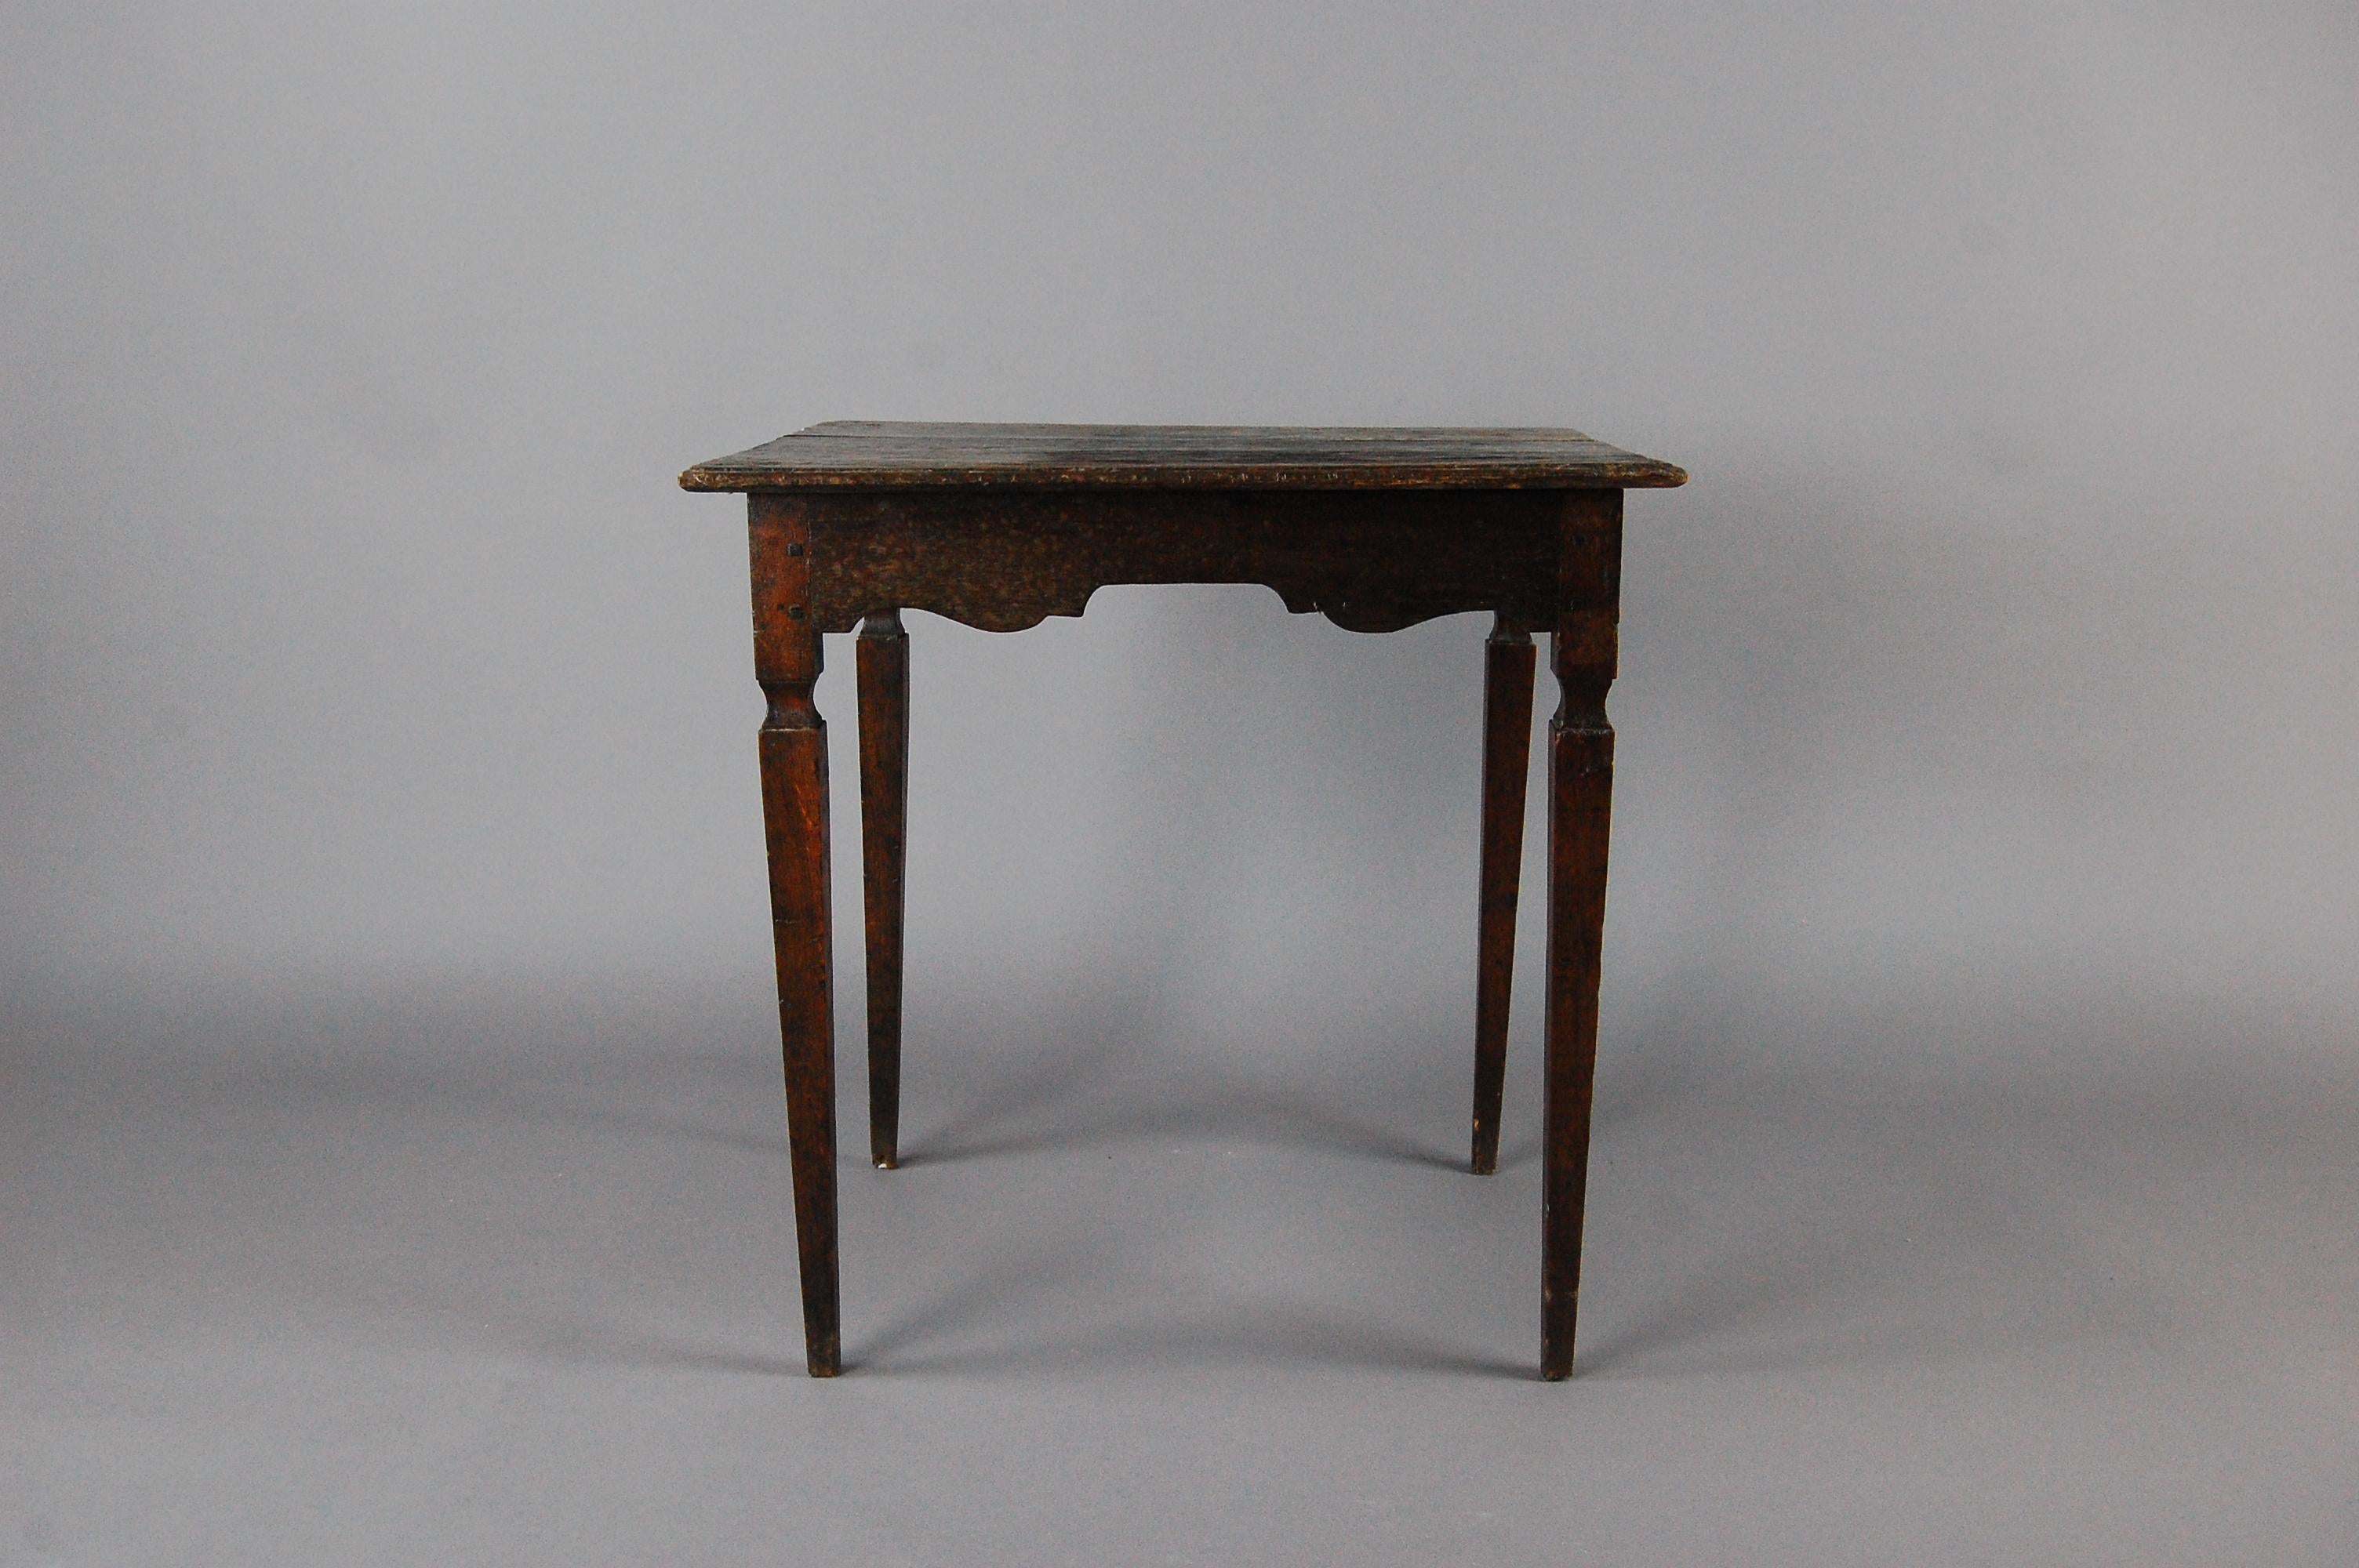 Untouched Louis XVI period side table, wonderful wear and patina. France, circa 1780.
   